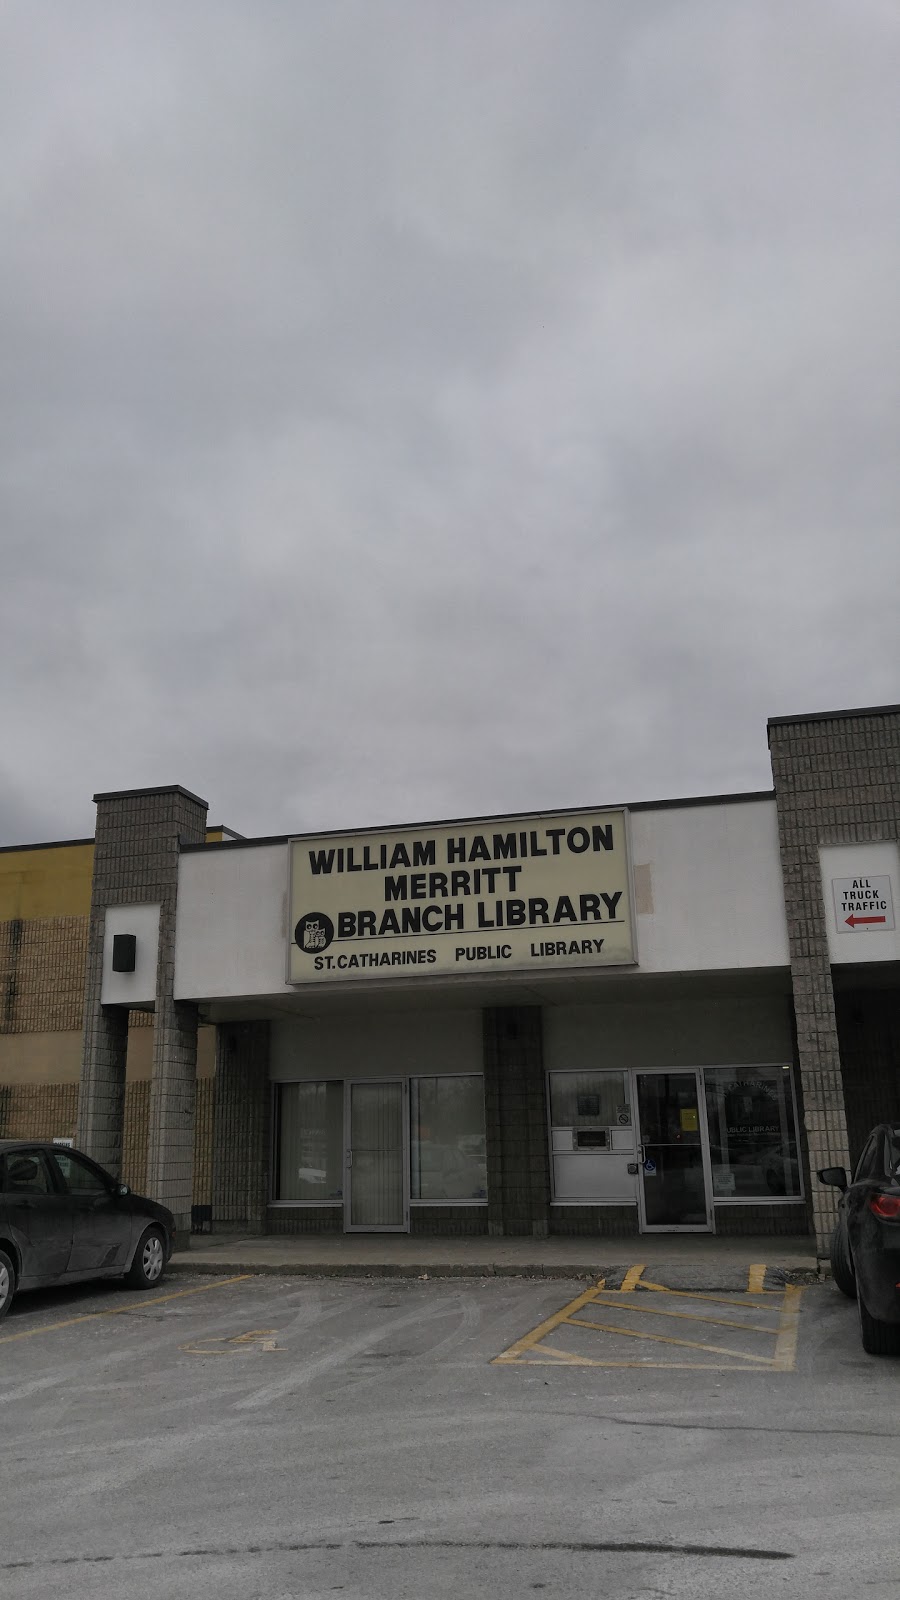 St. Catharines Public Library - Merritt Branch | 149 Hartzel Rd, St. Catharines, ON L2P 1N6, Canada | Phone: (905) 688-6103 ext. 400